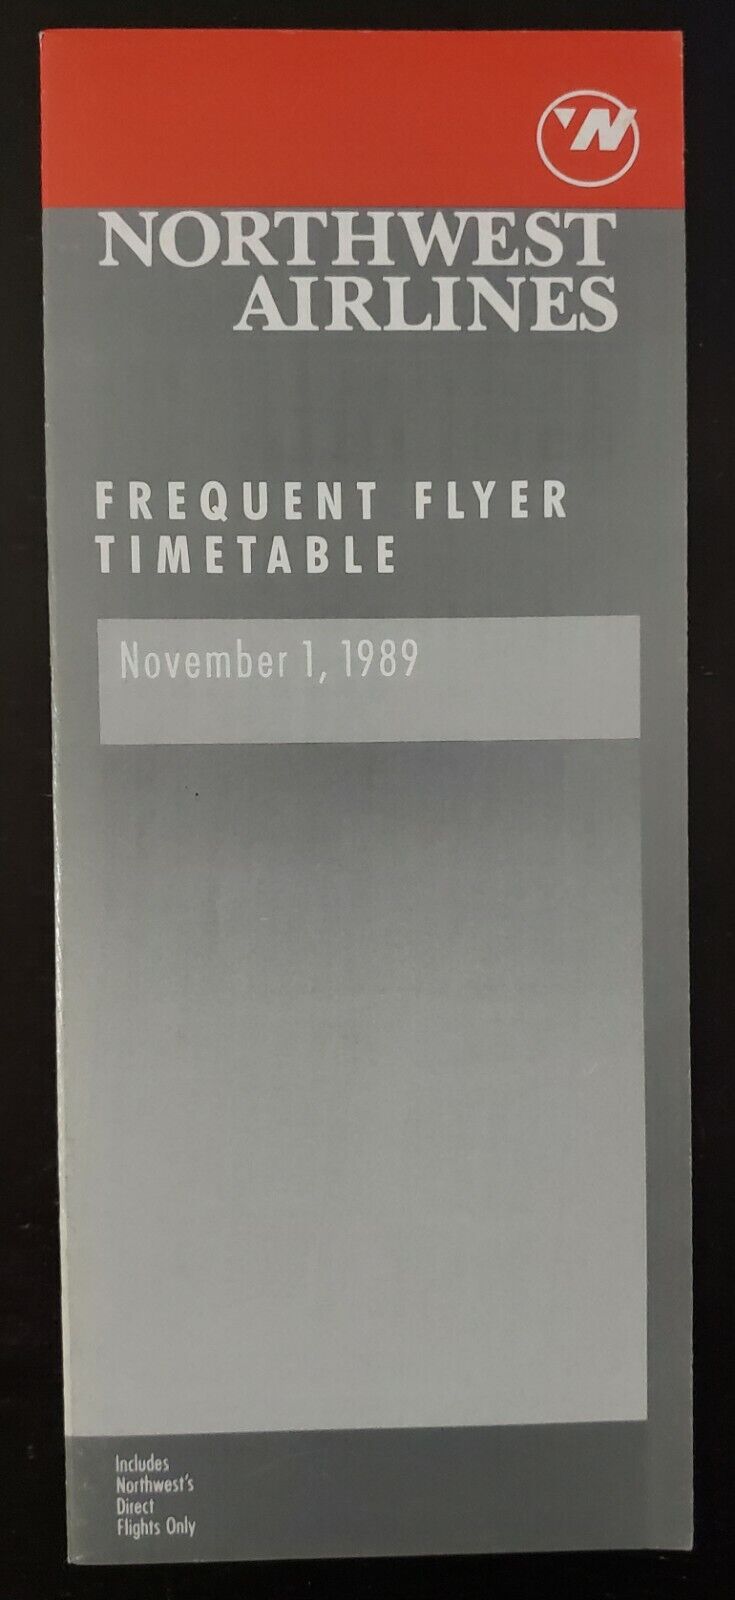 NORTHWEST AIRLINES - NONSTOP & DIRECT TIMETABLE - 1 NOVEMBER 1989